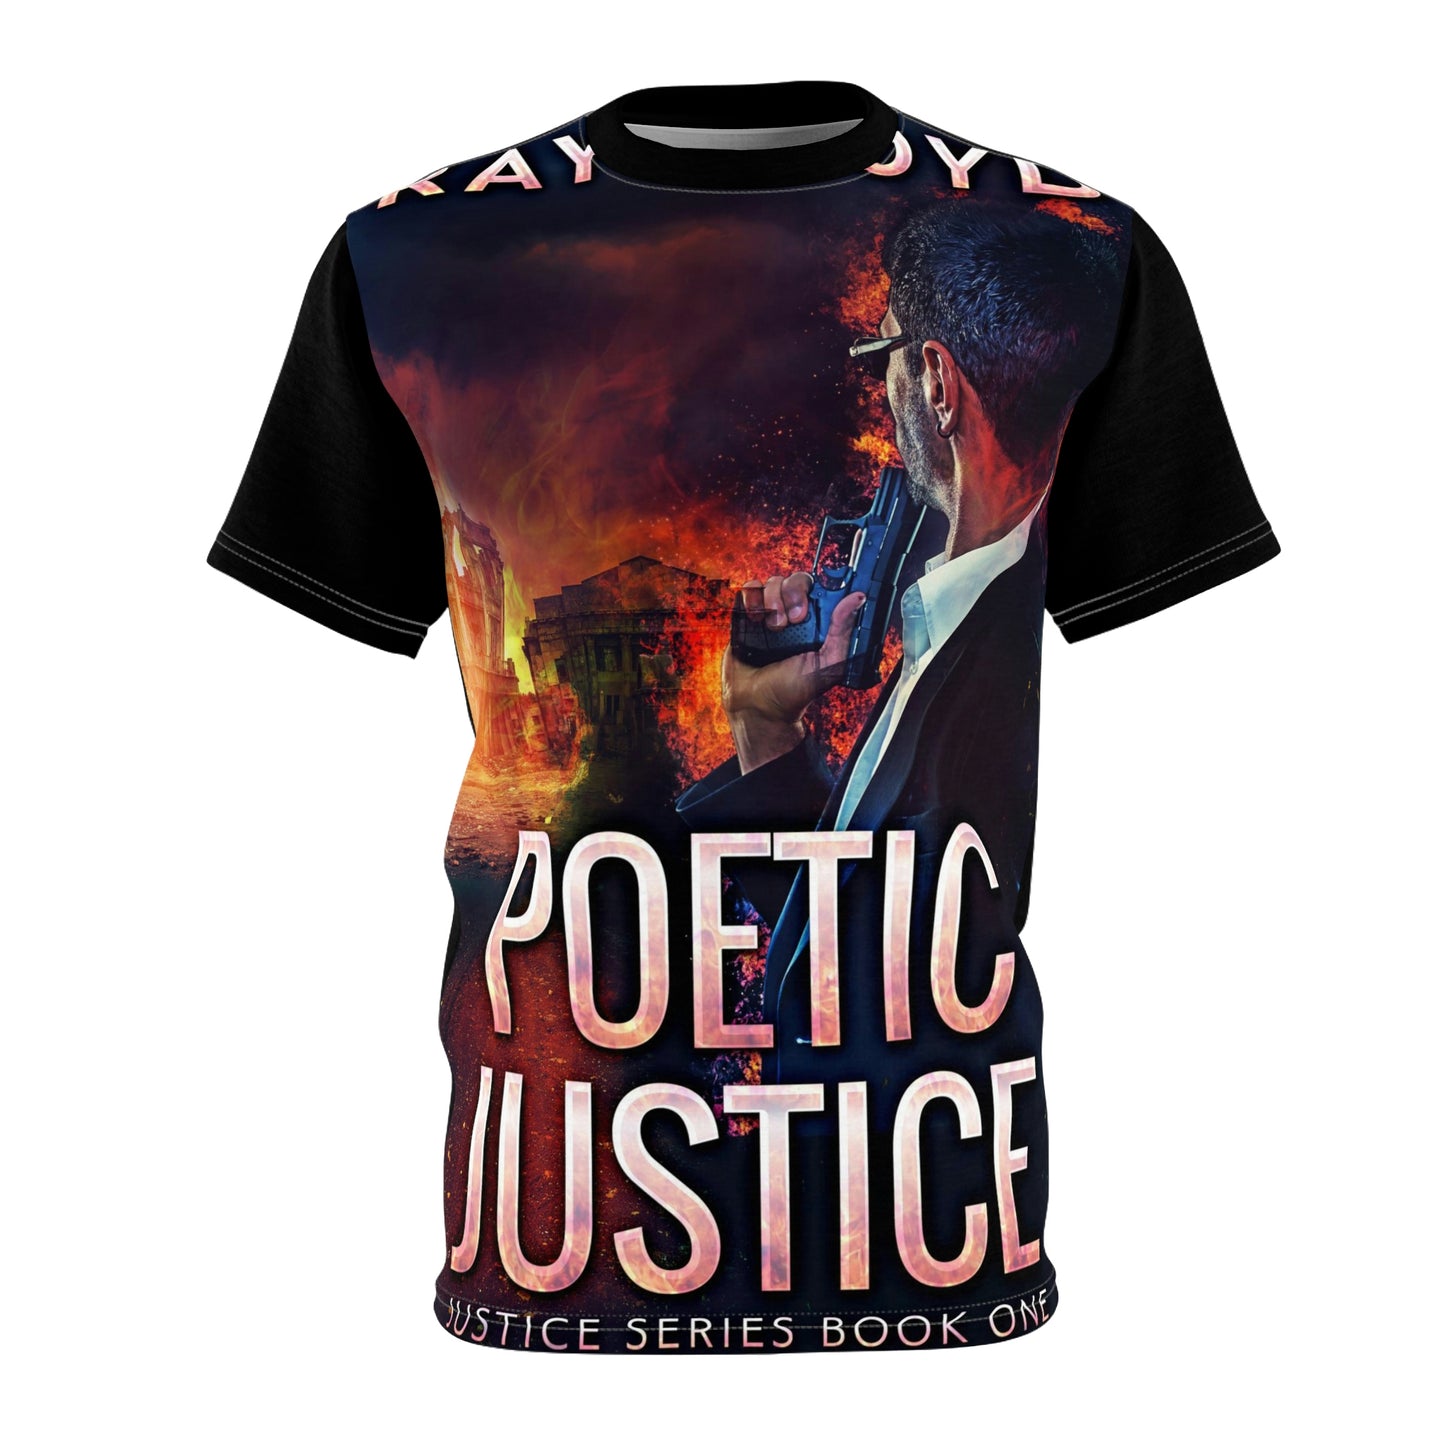 Poetic Justice - Unisex All-Over Print Cut & Sew T-Shirt